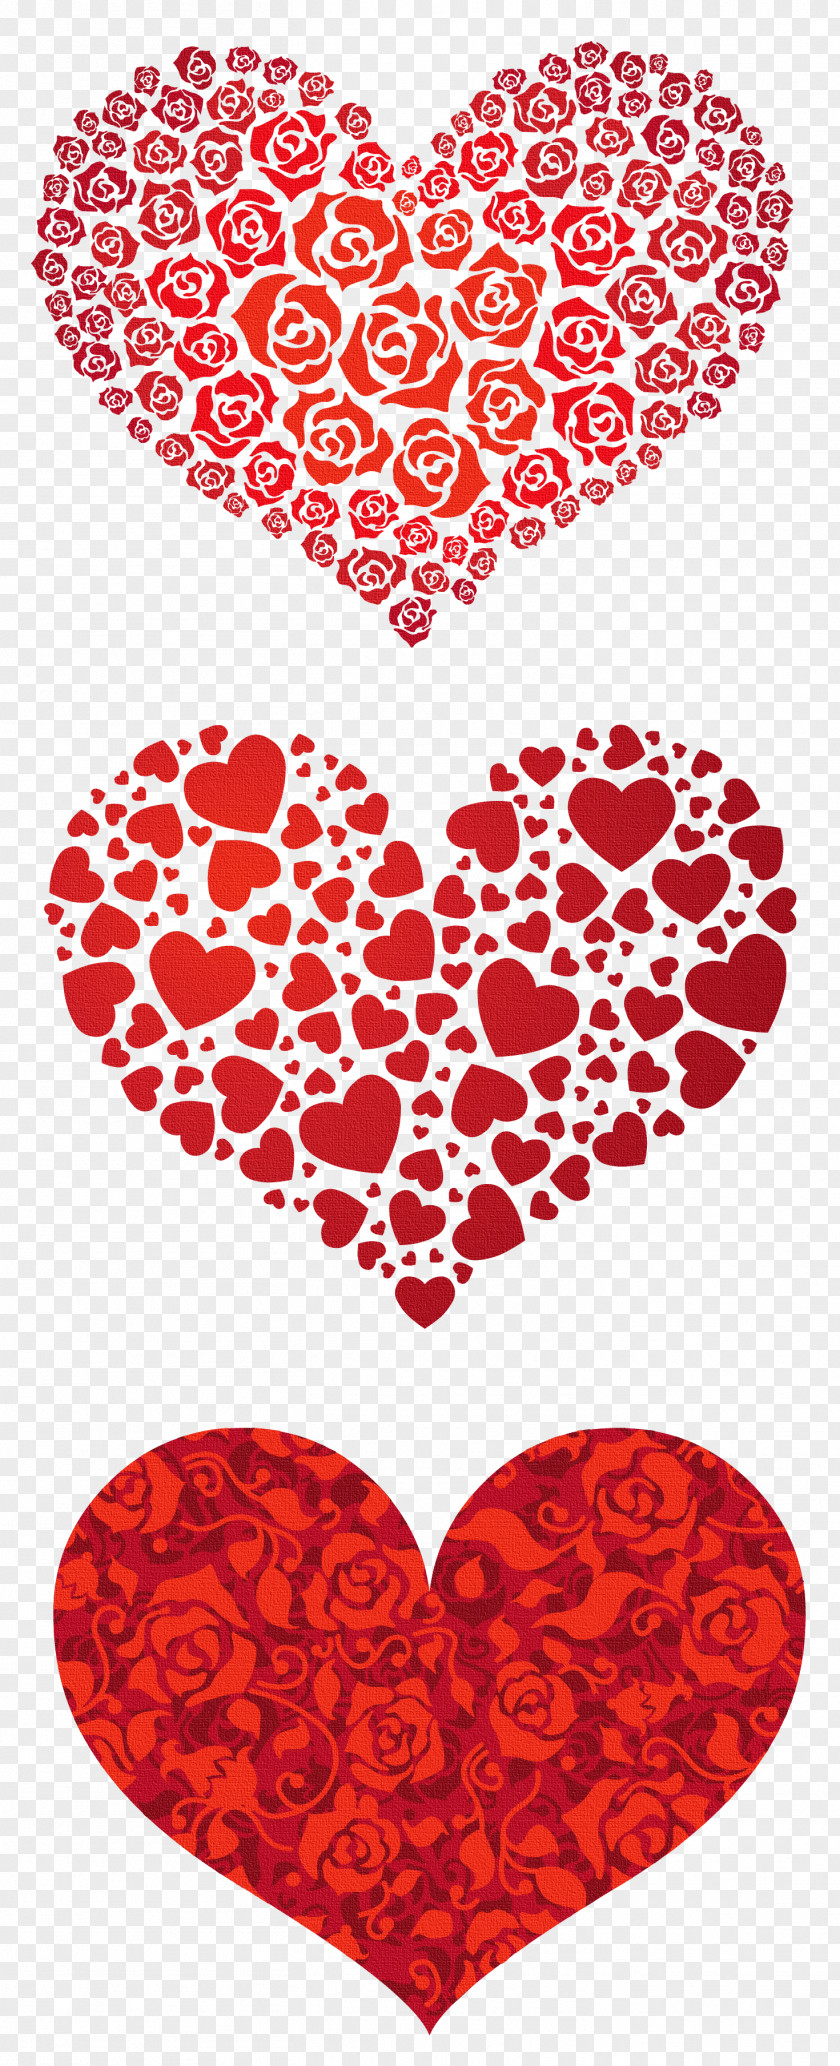 Red Hearts Valentine's Day Heart Clip Art PNG